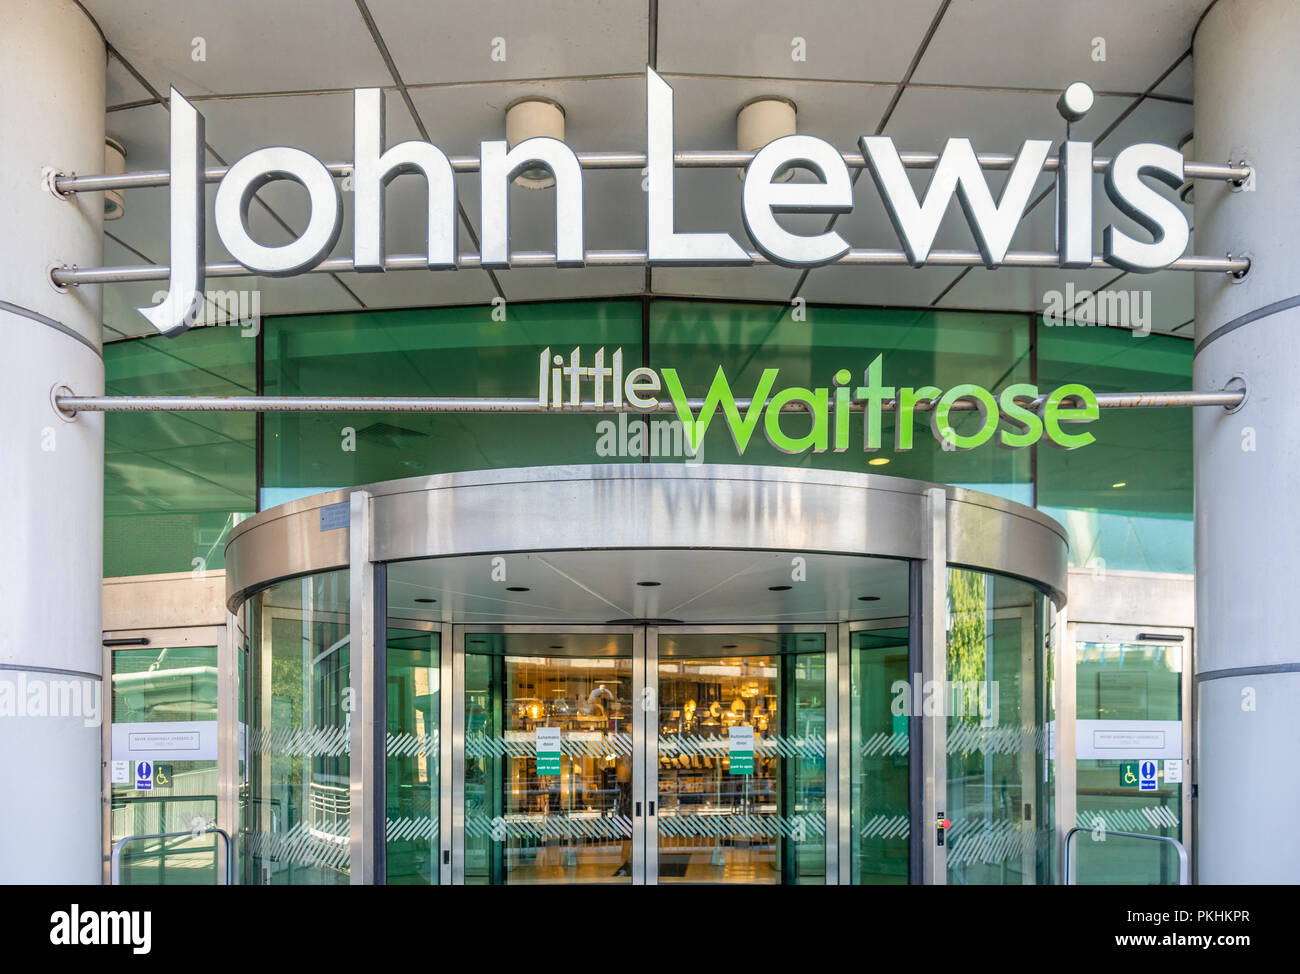 Entrance to a John Lewis department store with a Little Waitrose store inside, 2018, England, UK Stock Photo